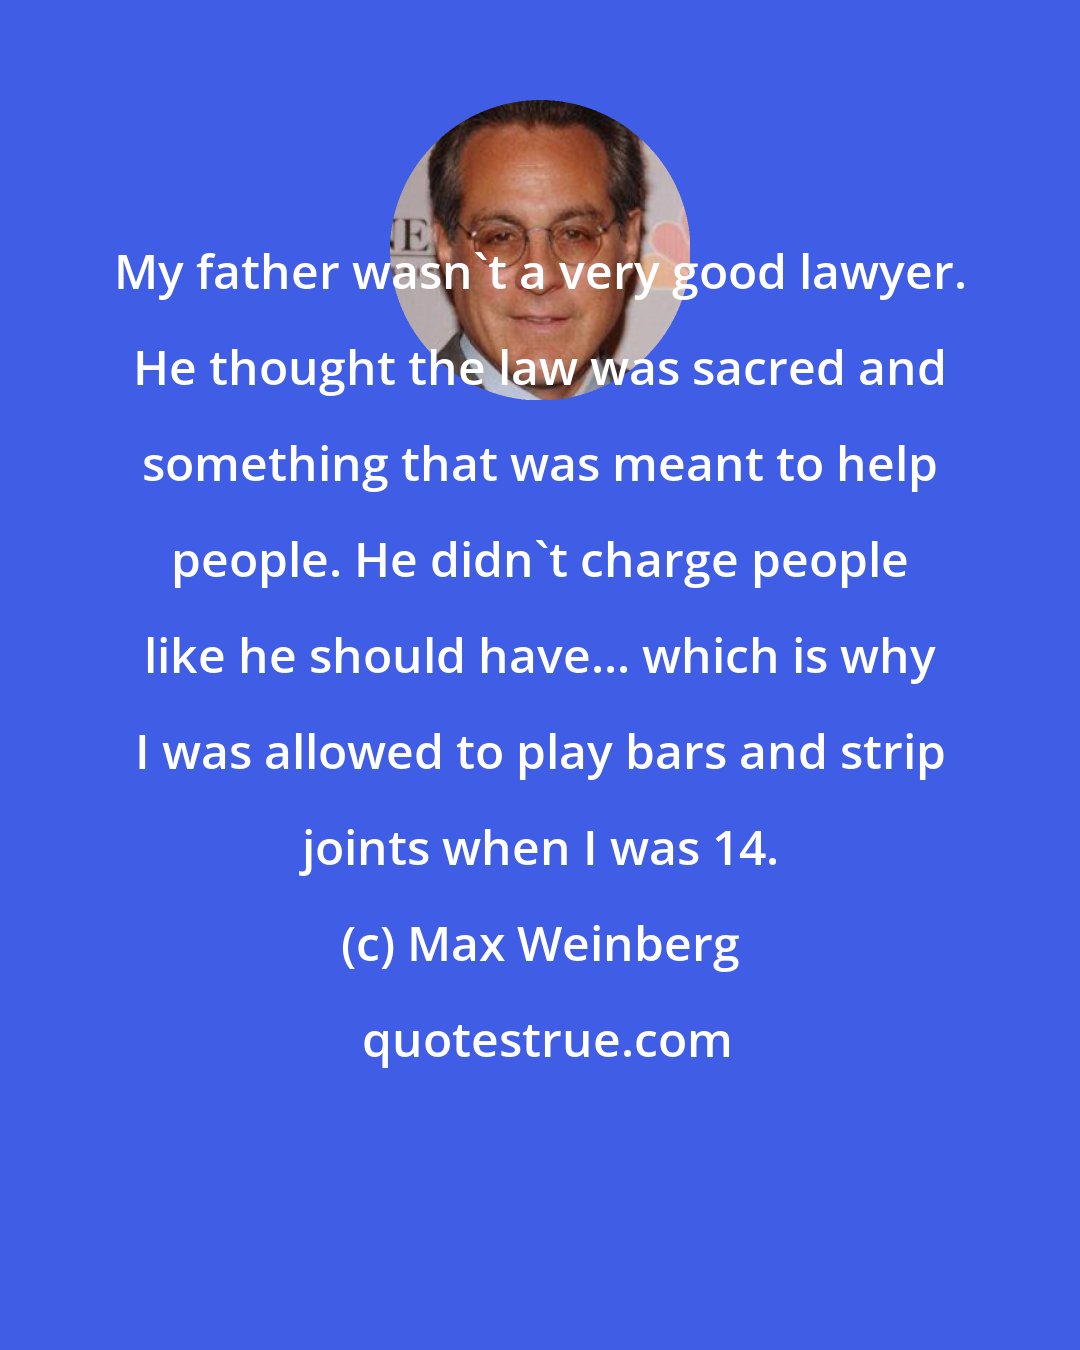 Max Weinberg: My father wasn't a very good lawyer. He thought the law was sacred and something that was meant to help people. He didn't charge people like he should have... which is why I was allowed to play bars and strip joints when I was 14.